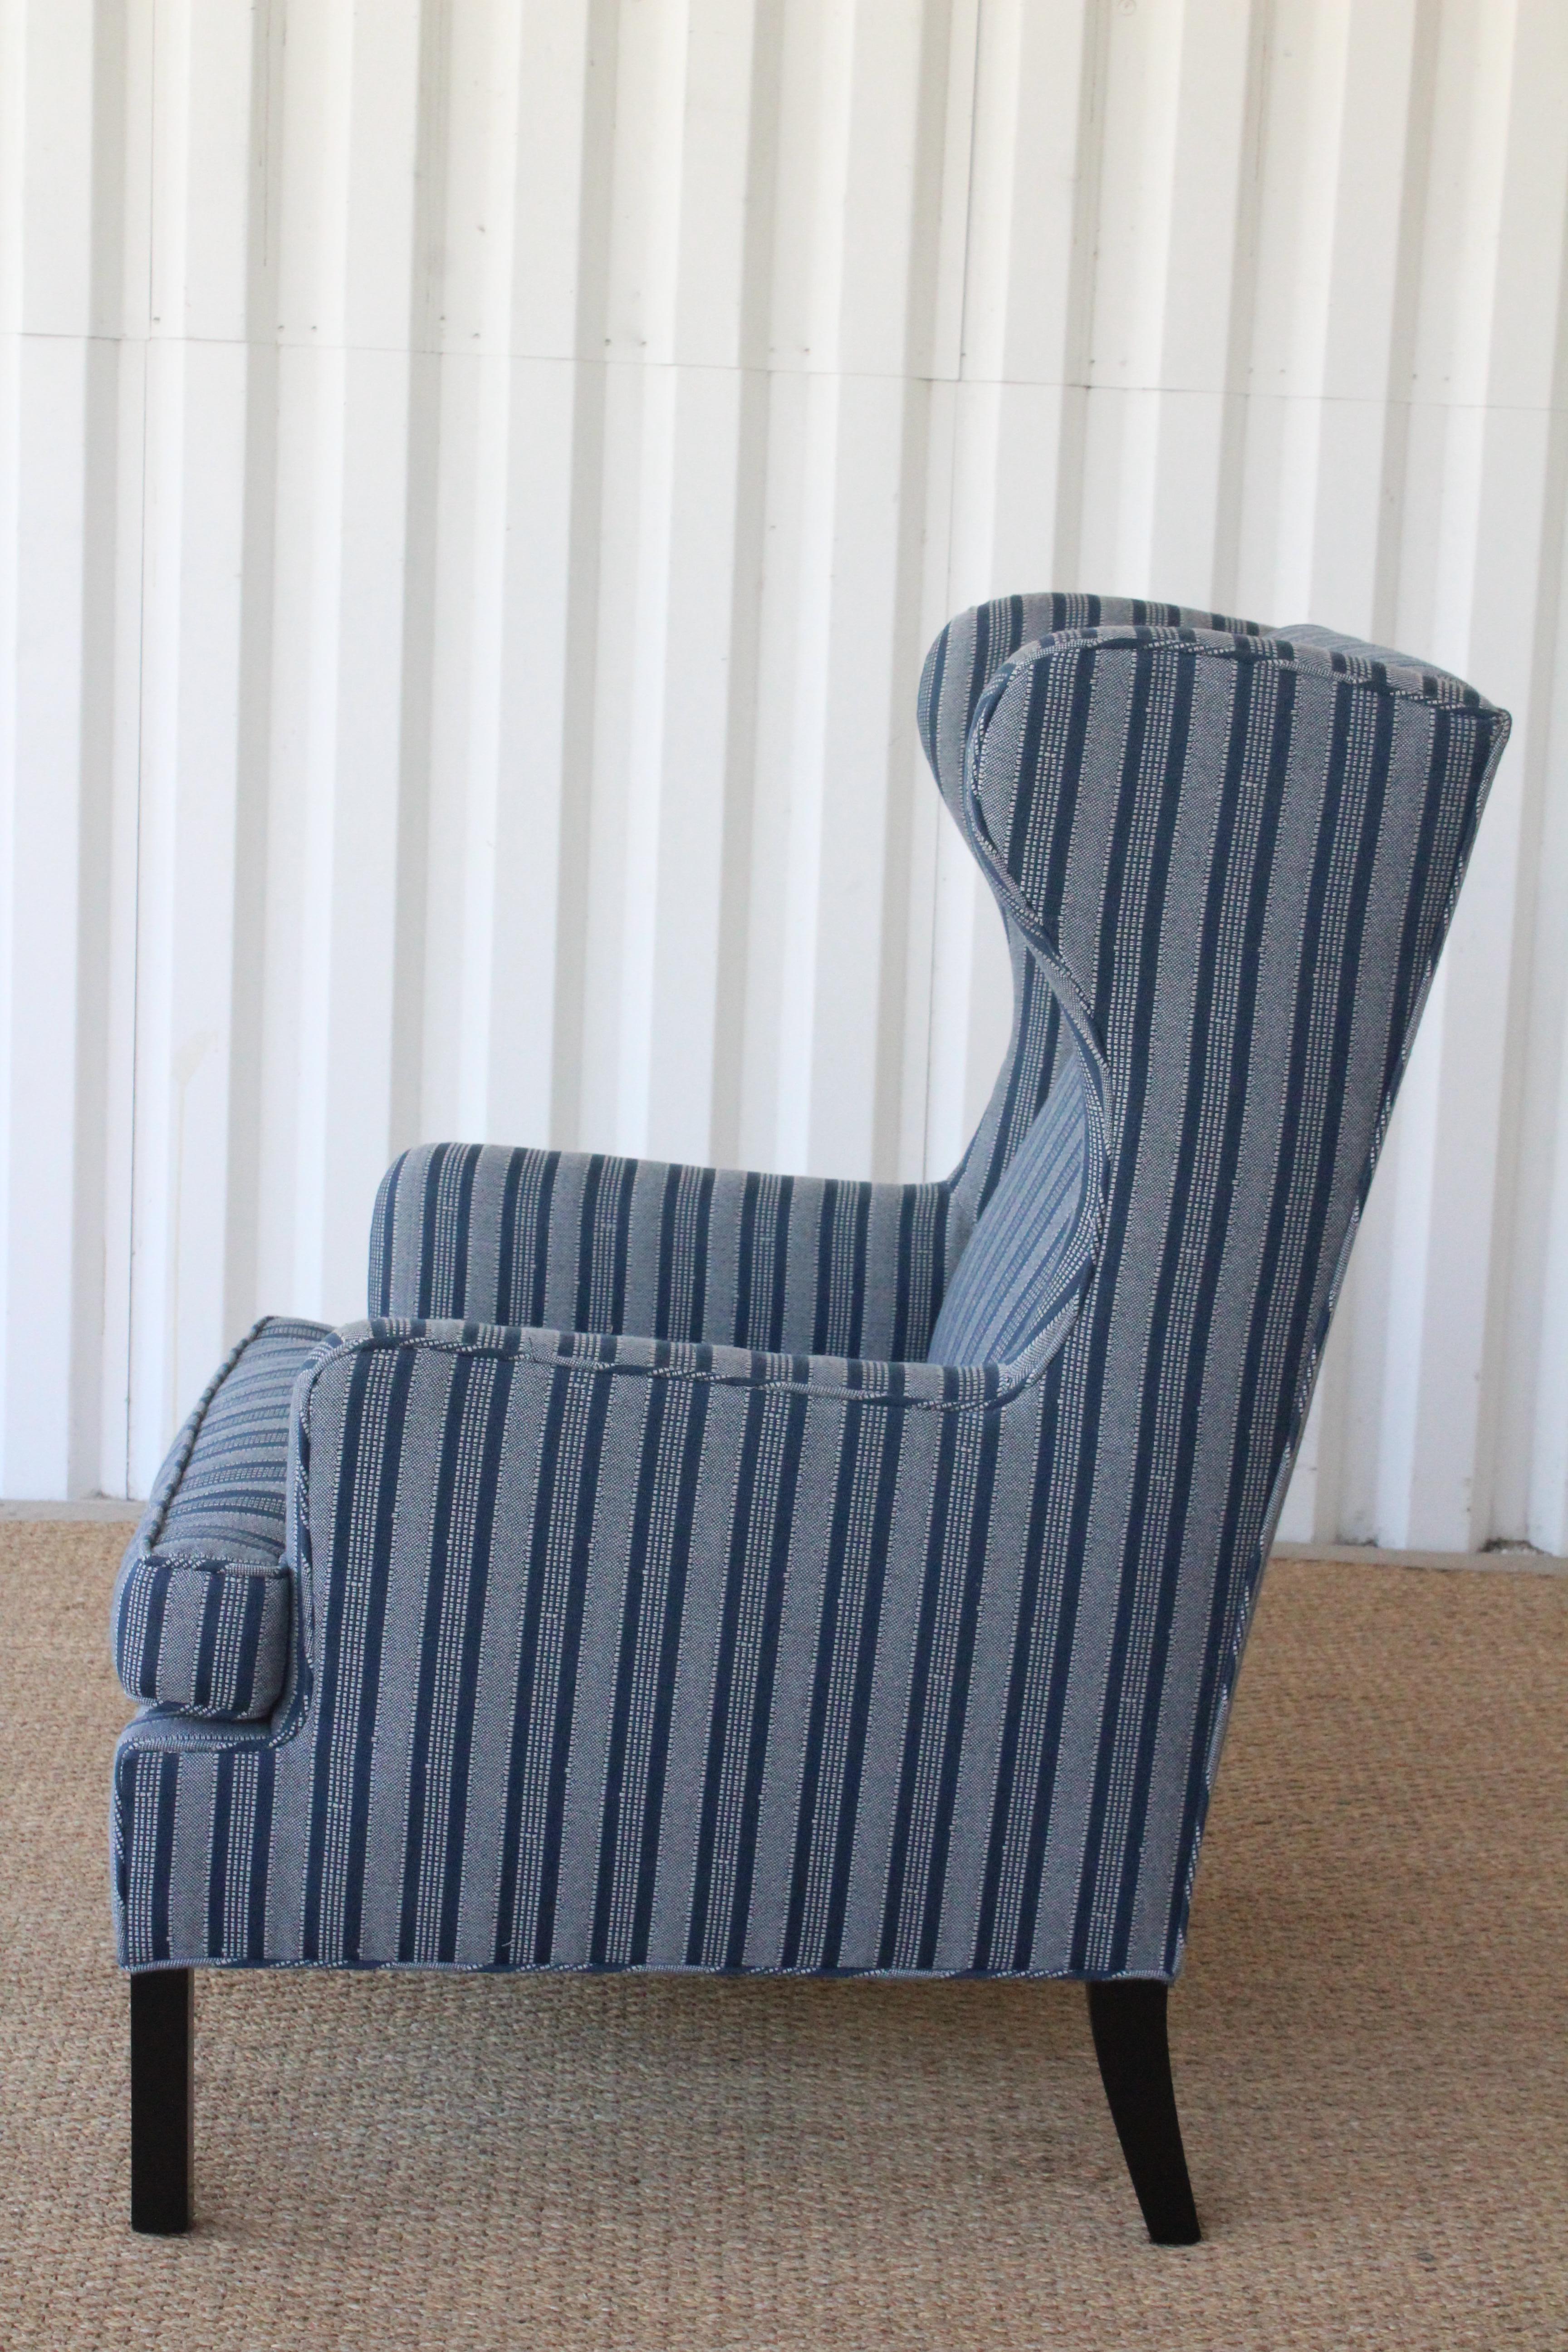 1950s Danish High Back Wing Chair Upholstered in Peter Dunham Textiles Fabric 5